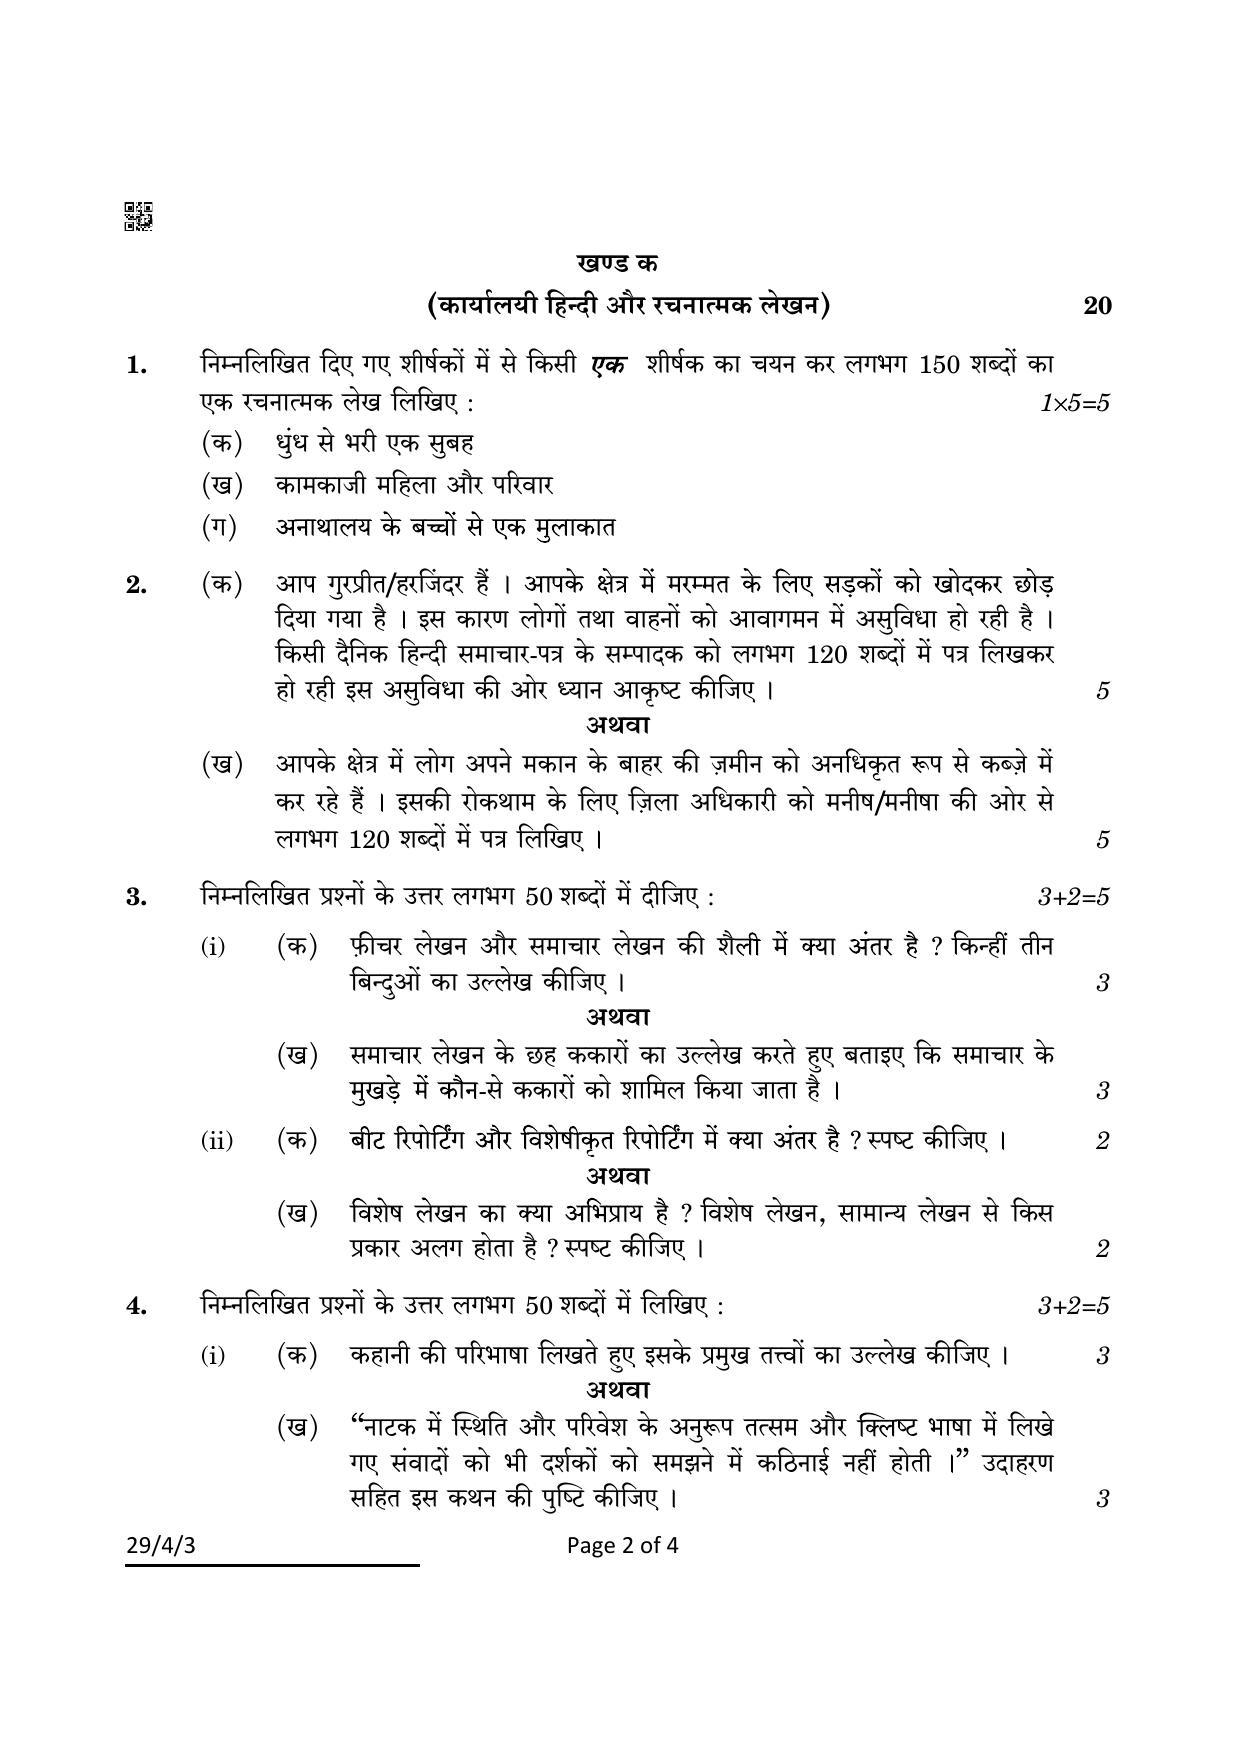 CBSE Class 12 29-4-3 Hindi Elective 2022 Question Paper - Page 2